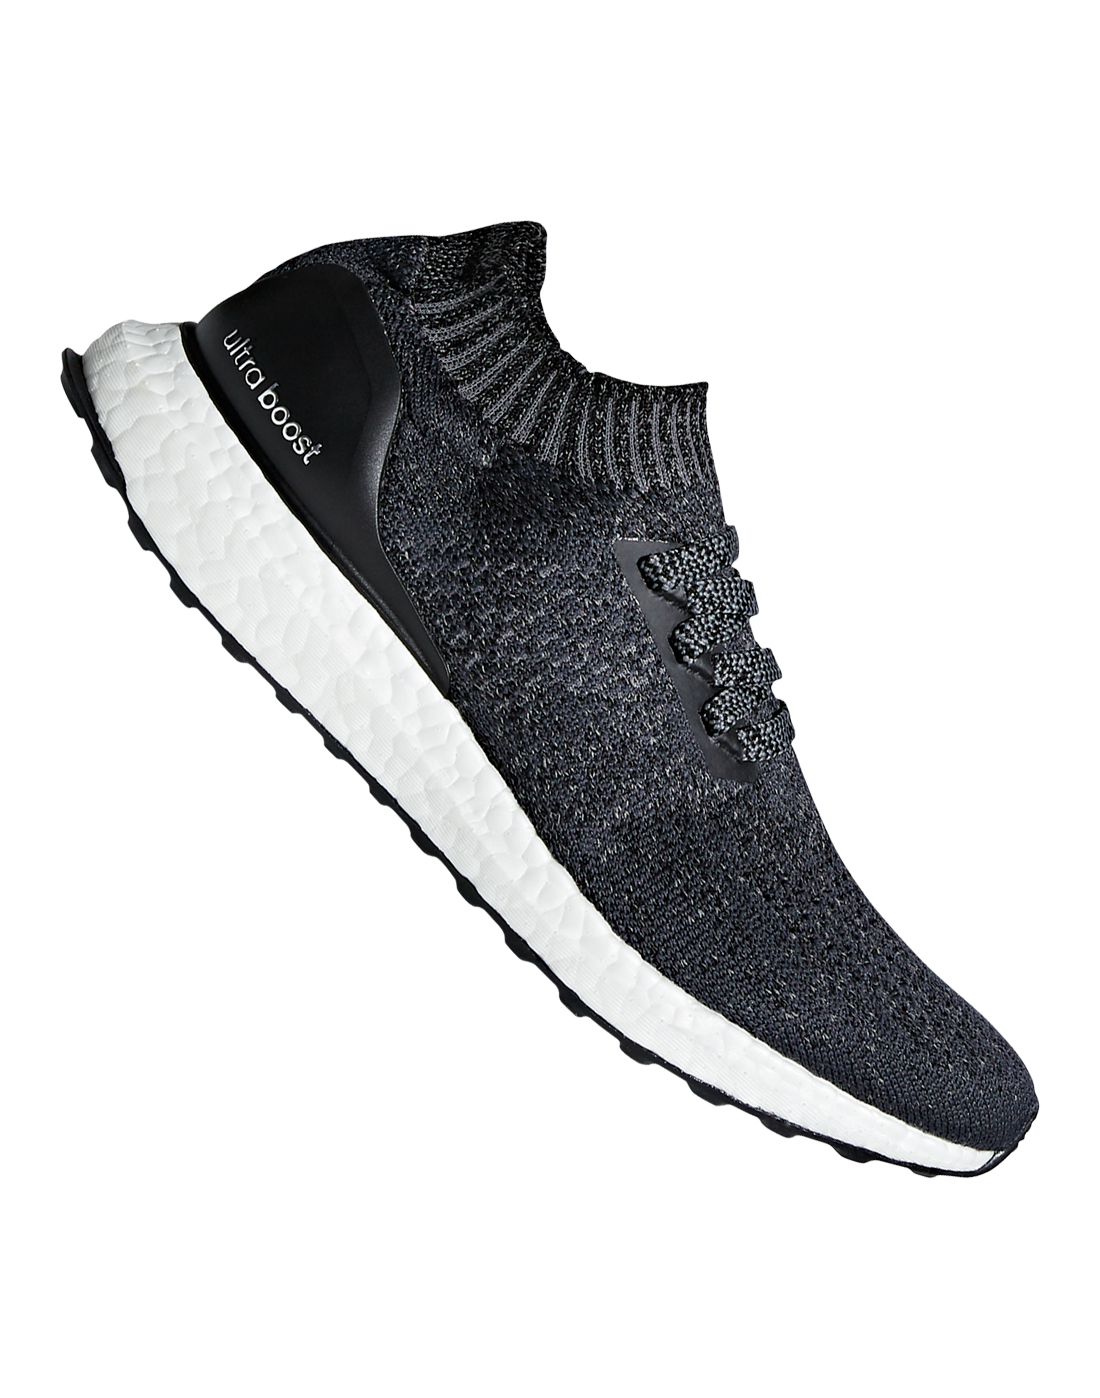 adidas ultra boost uncaged womens running shoes black grey